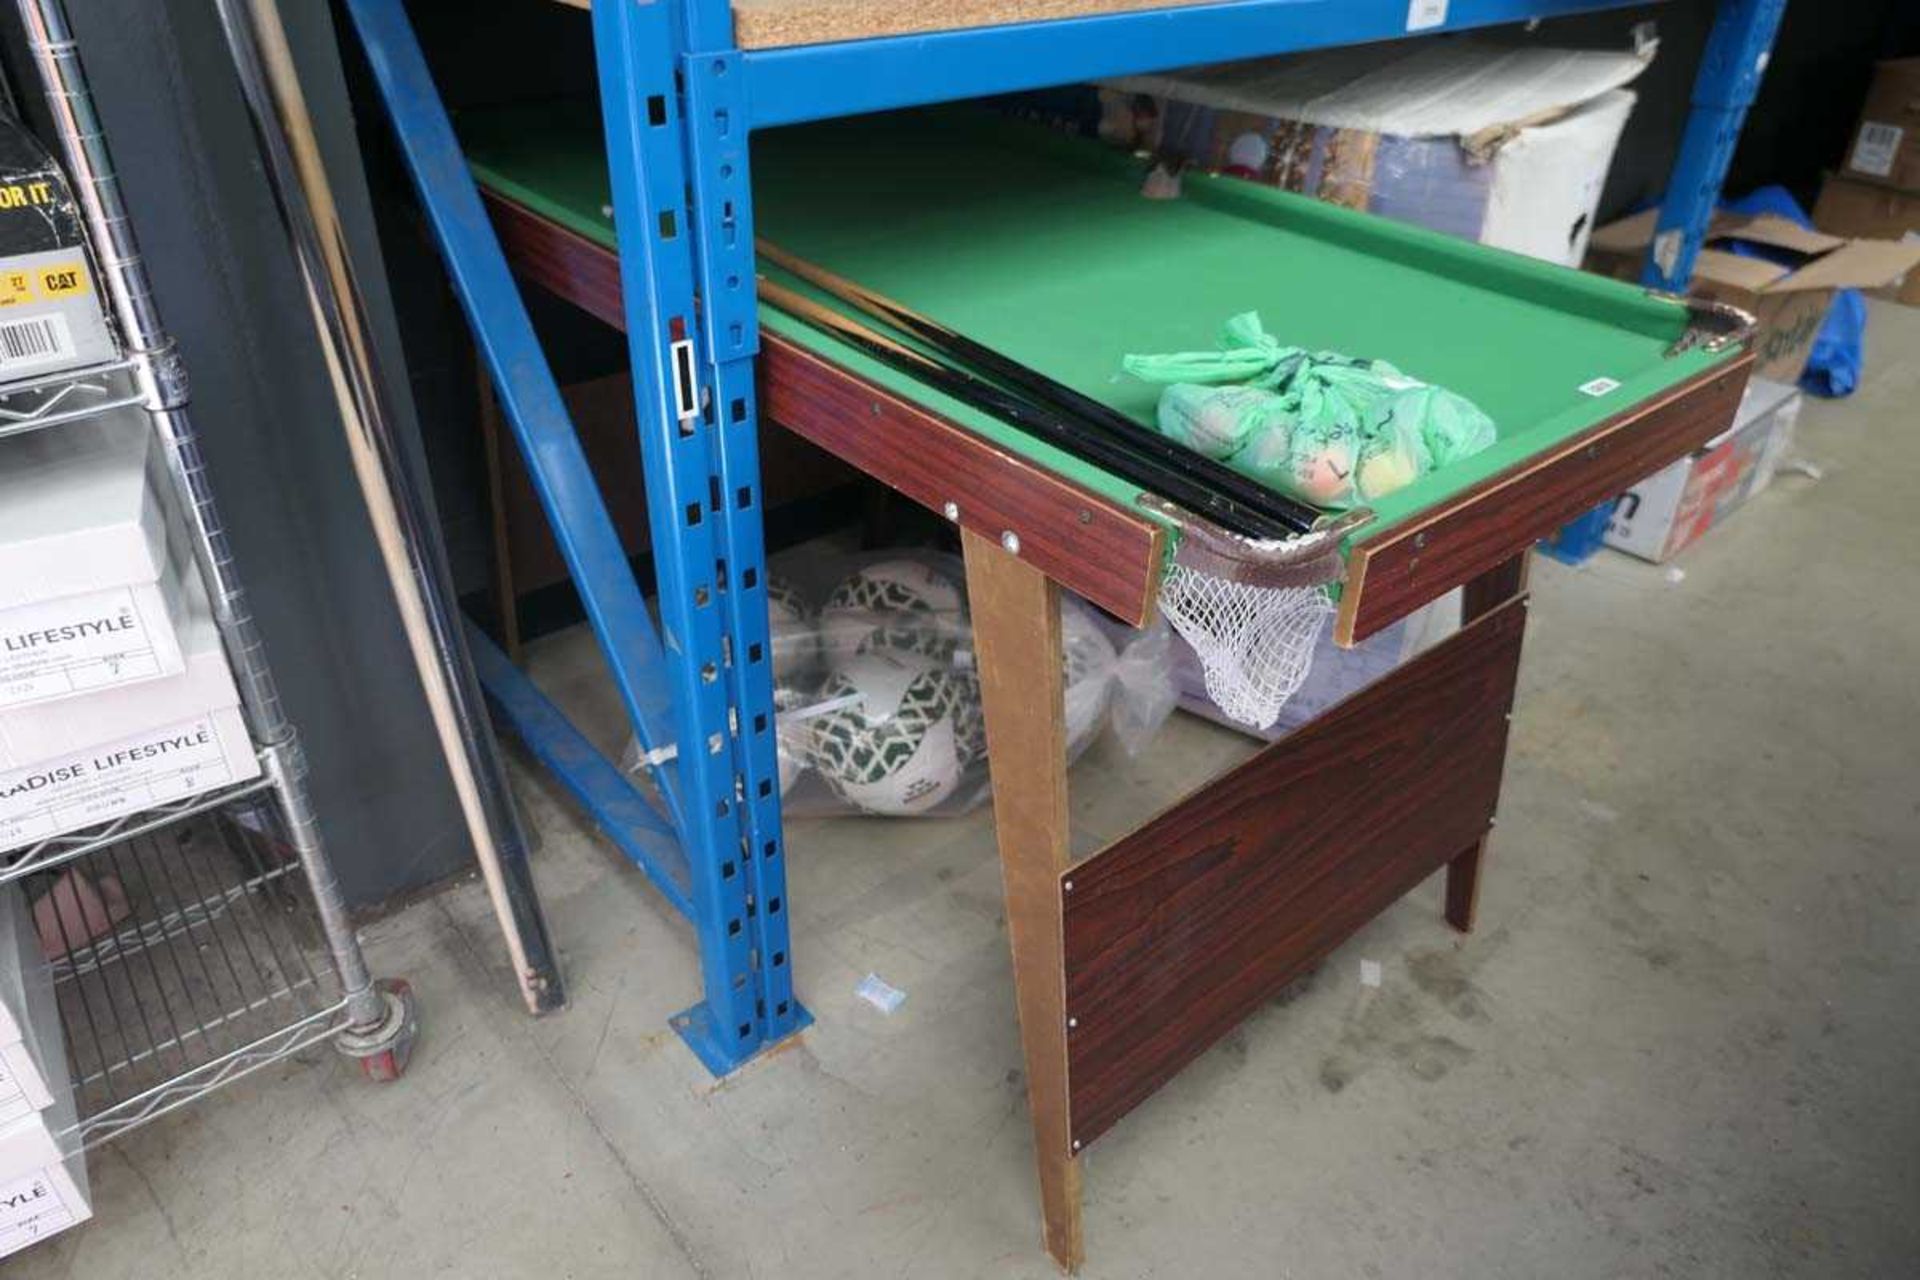 Child's foldable pool table